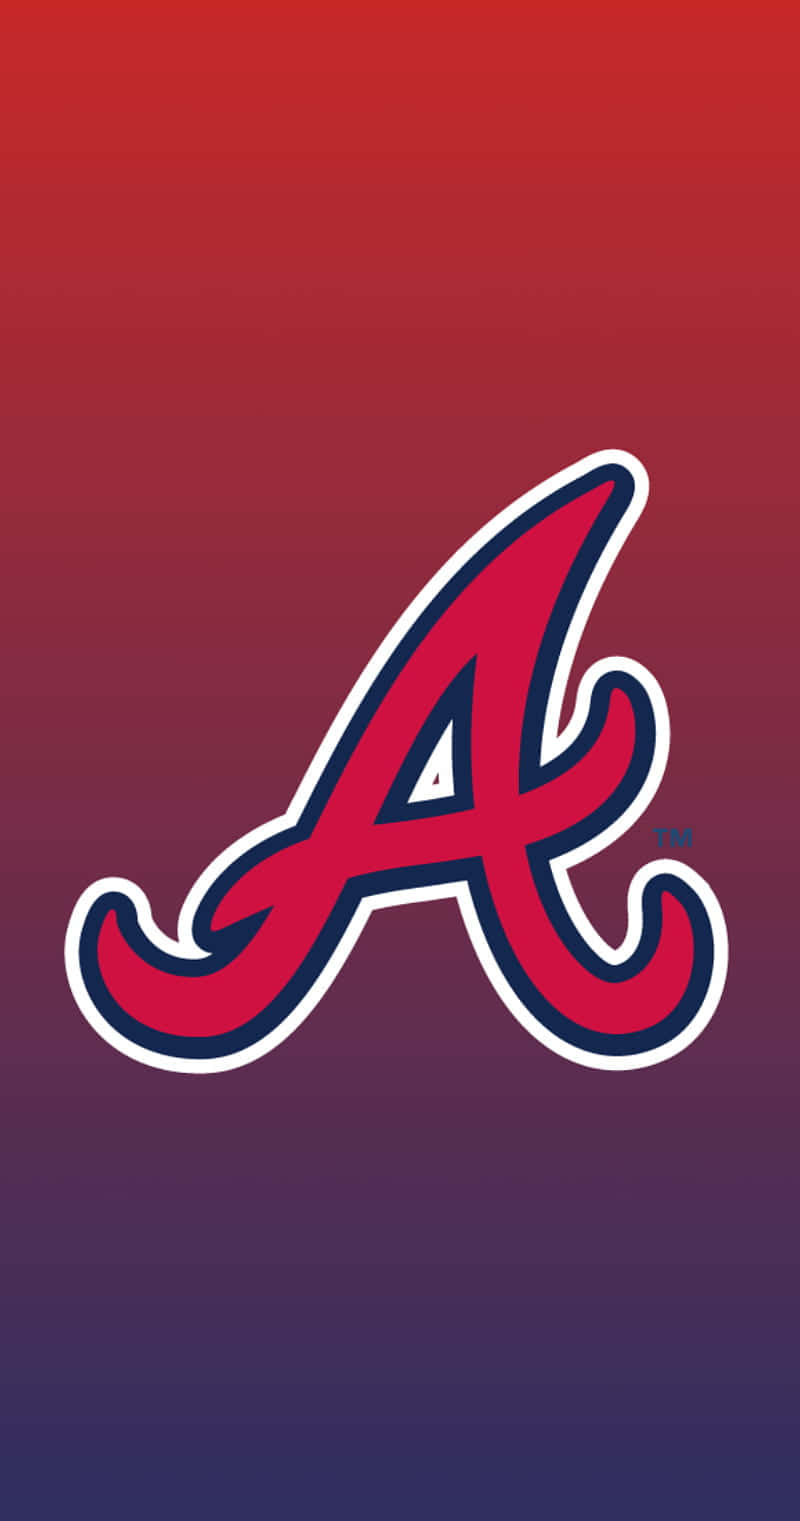 Download Atlanta Braves Logo On A Red And Blue Background